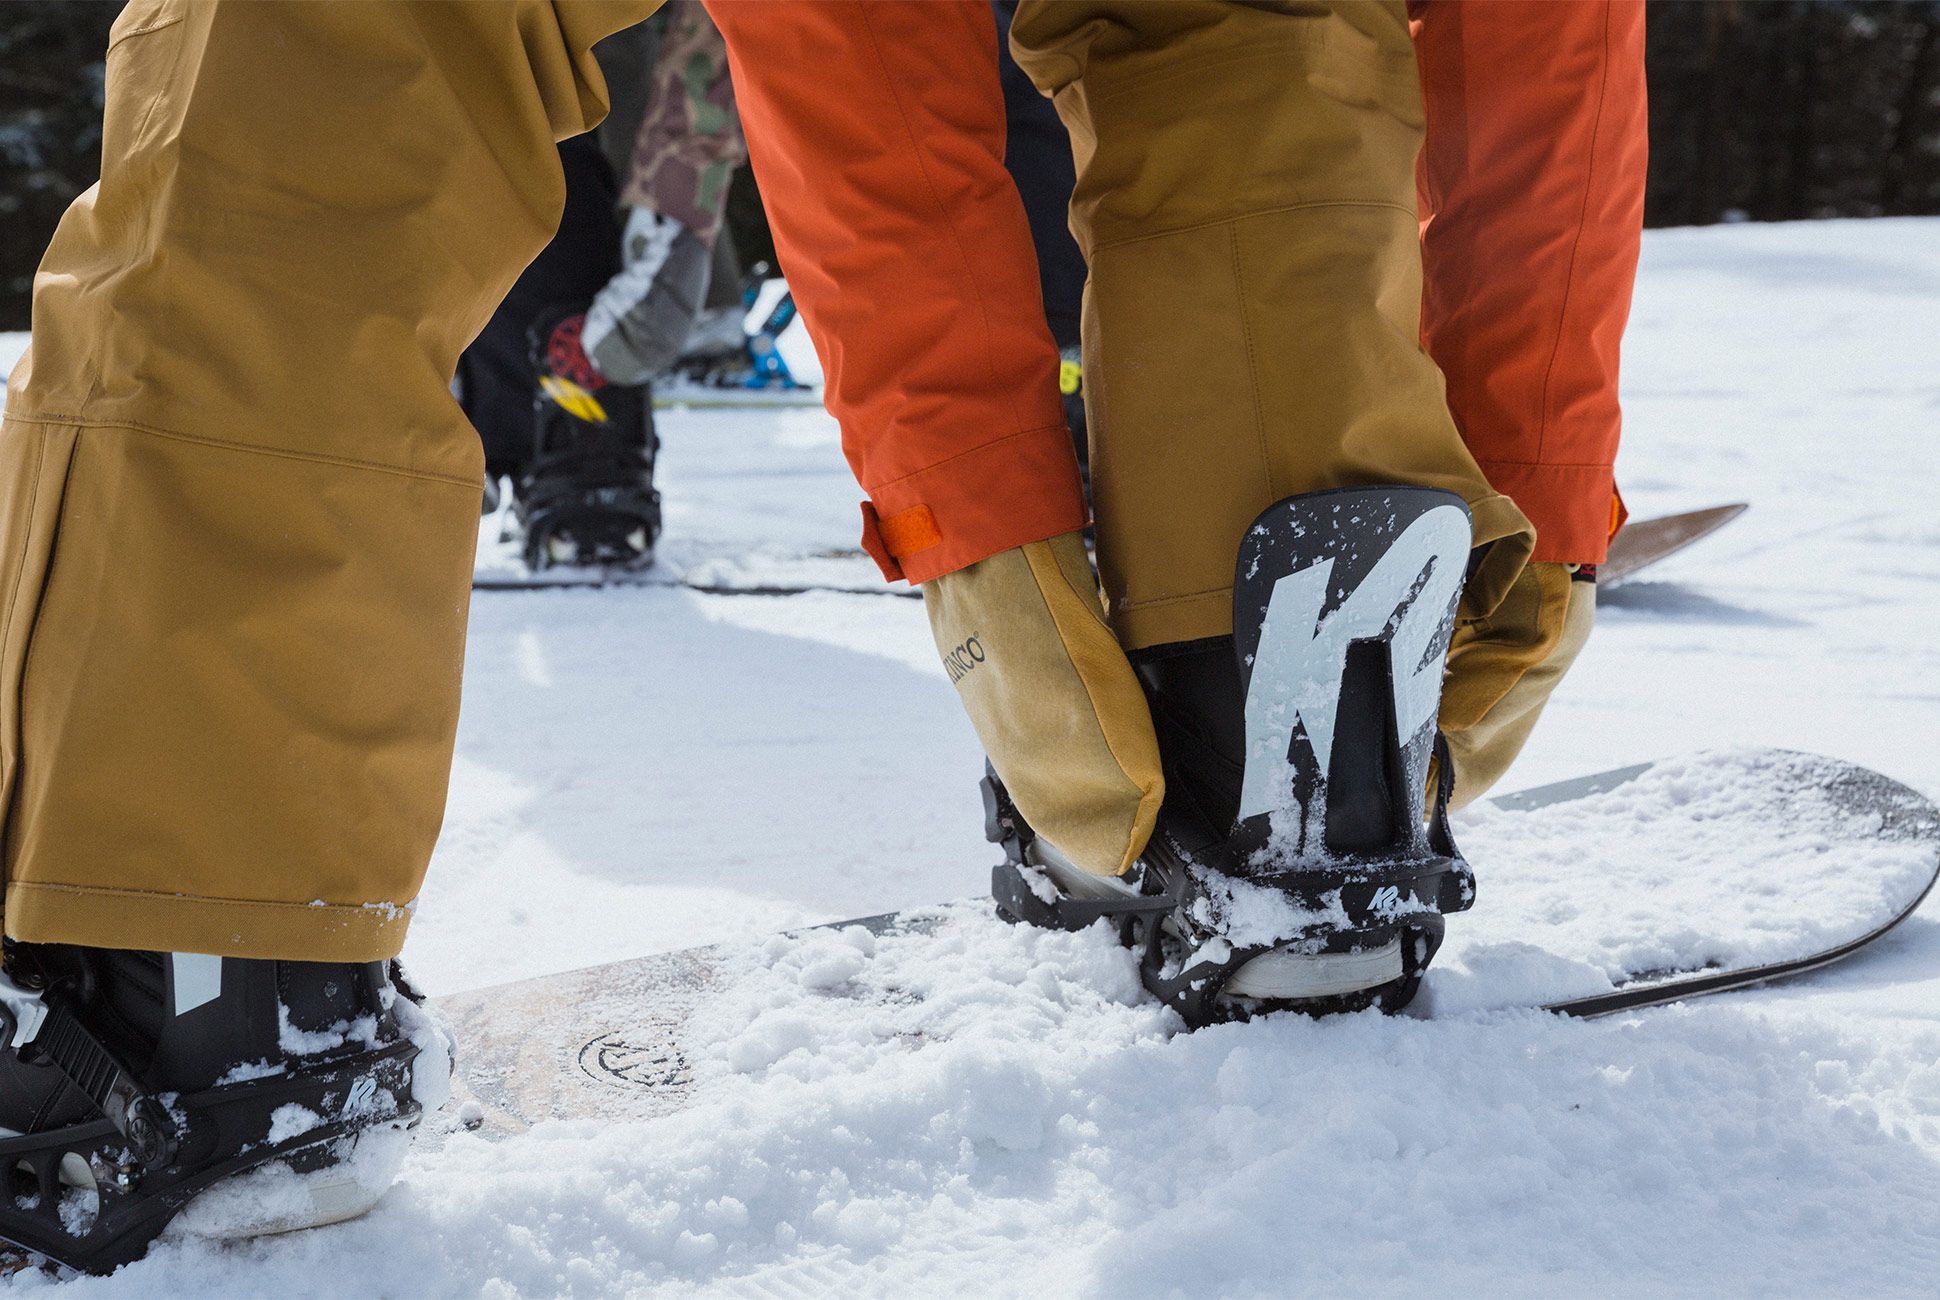 The Essential Guide to Après-Ski: What It Is, Attire & More - AFAR